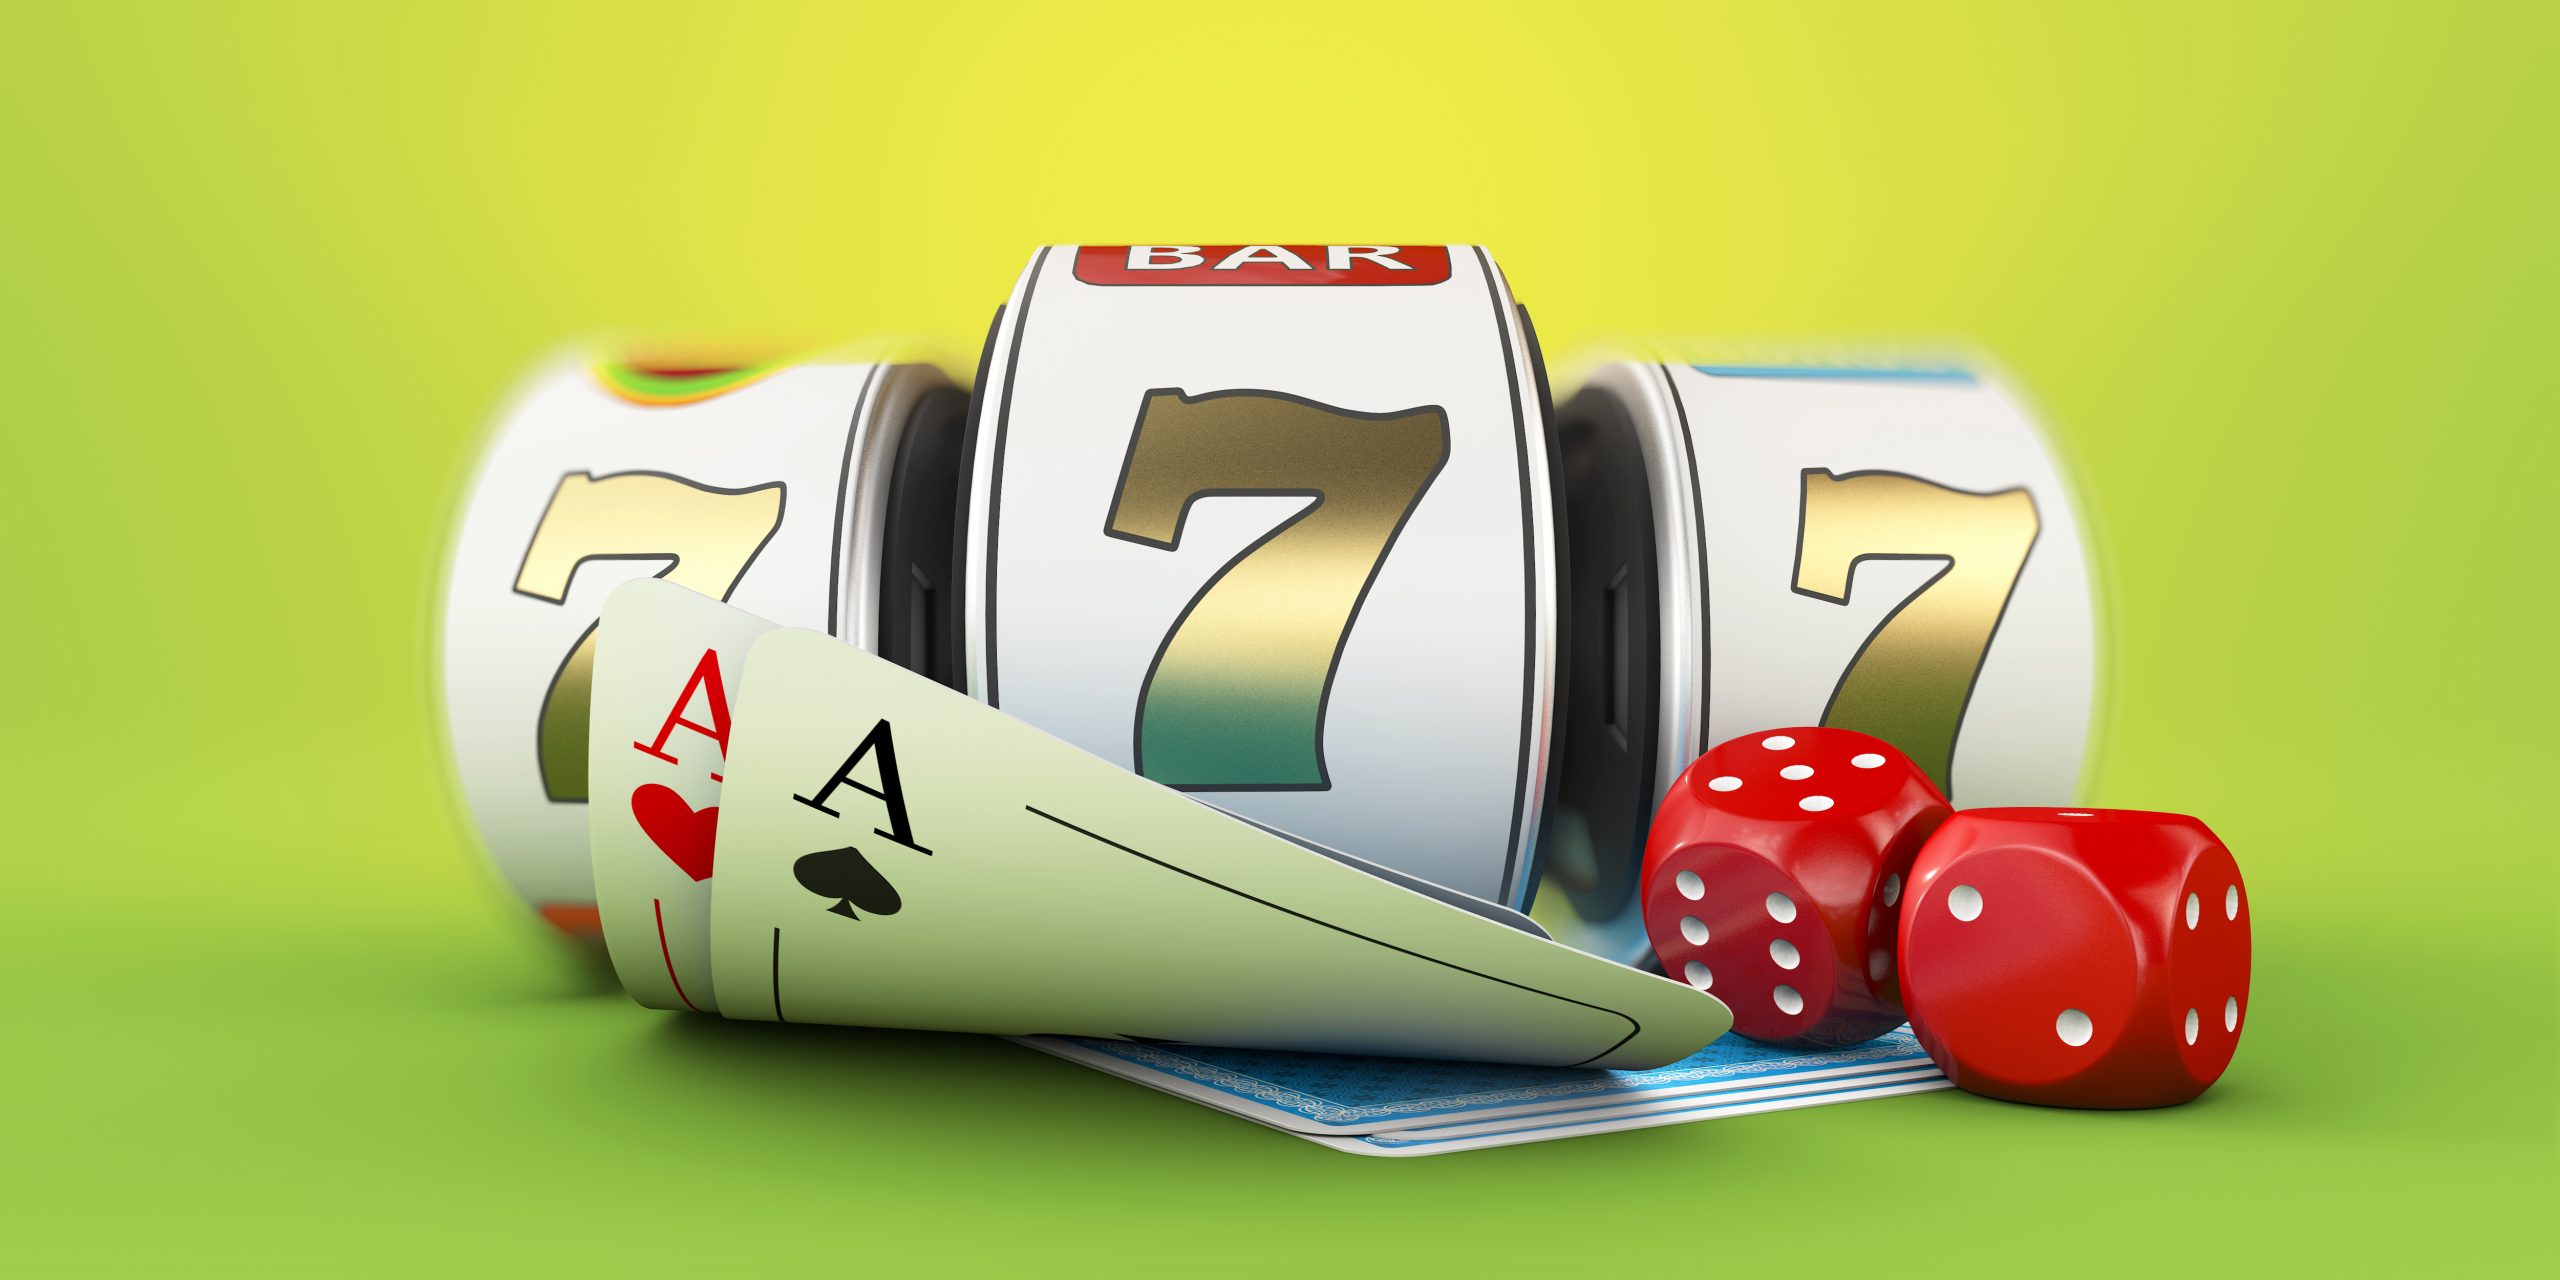 slot machine with lucky sevens jackpot dace clipping path included 3d rendering scaled Almanbahis Oranları